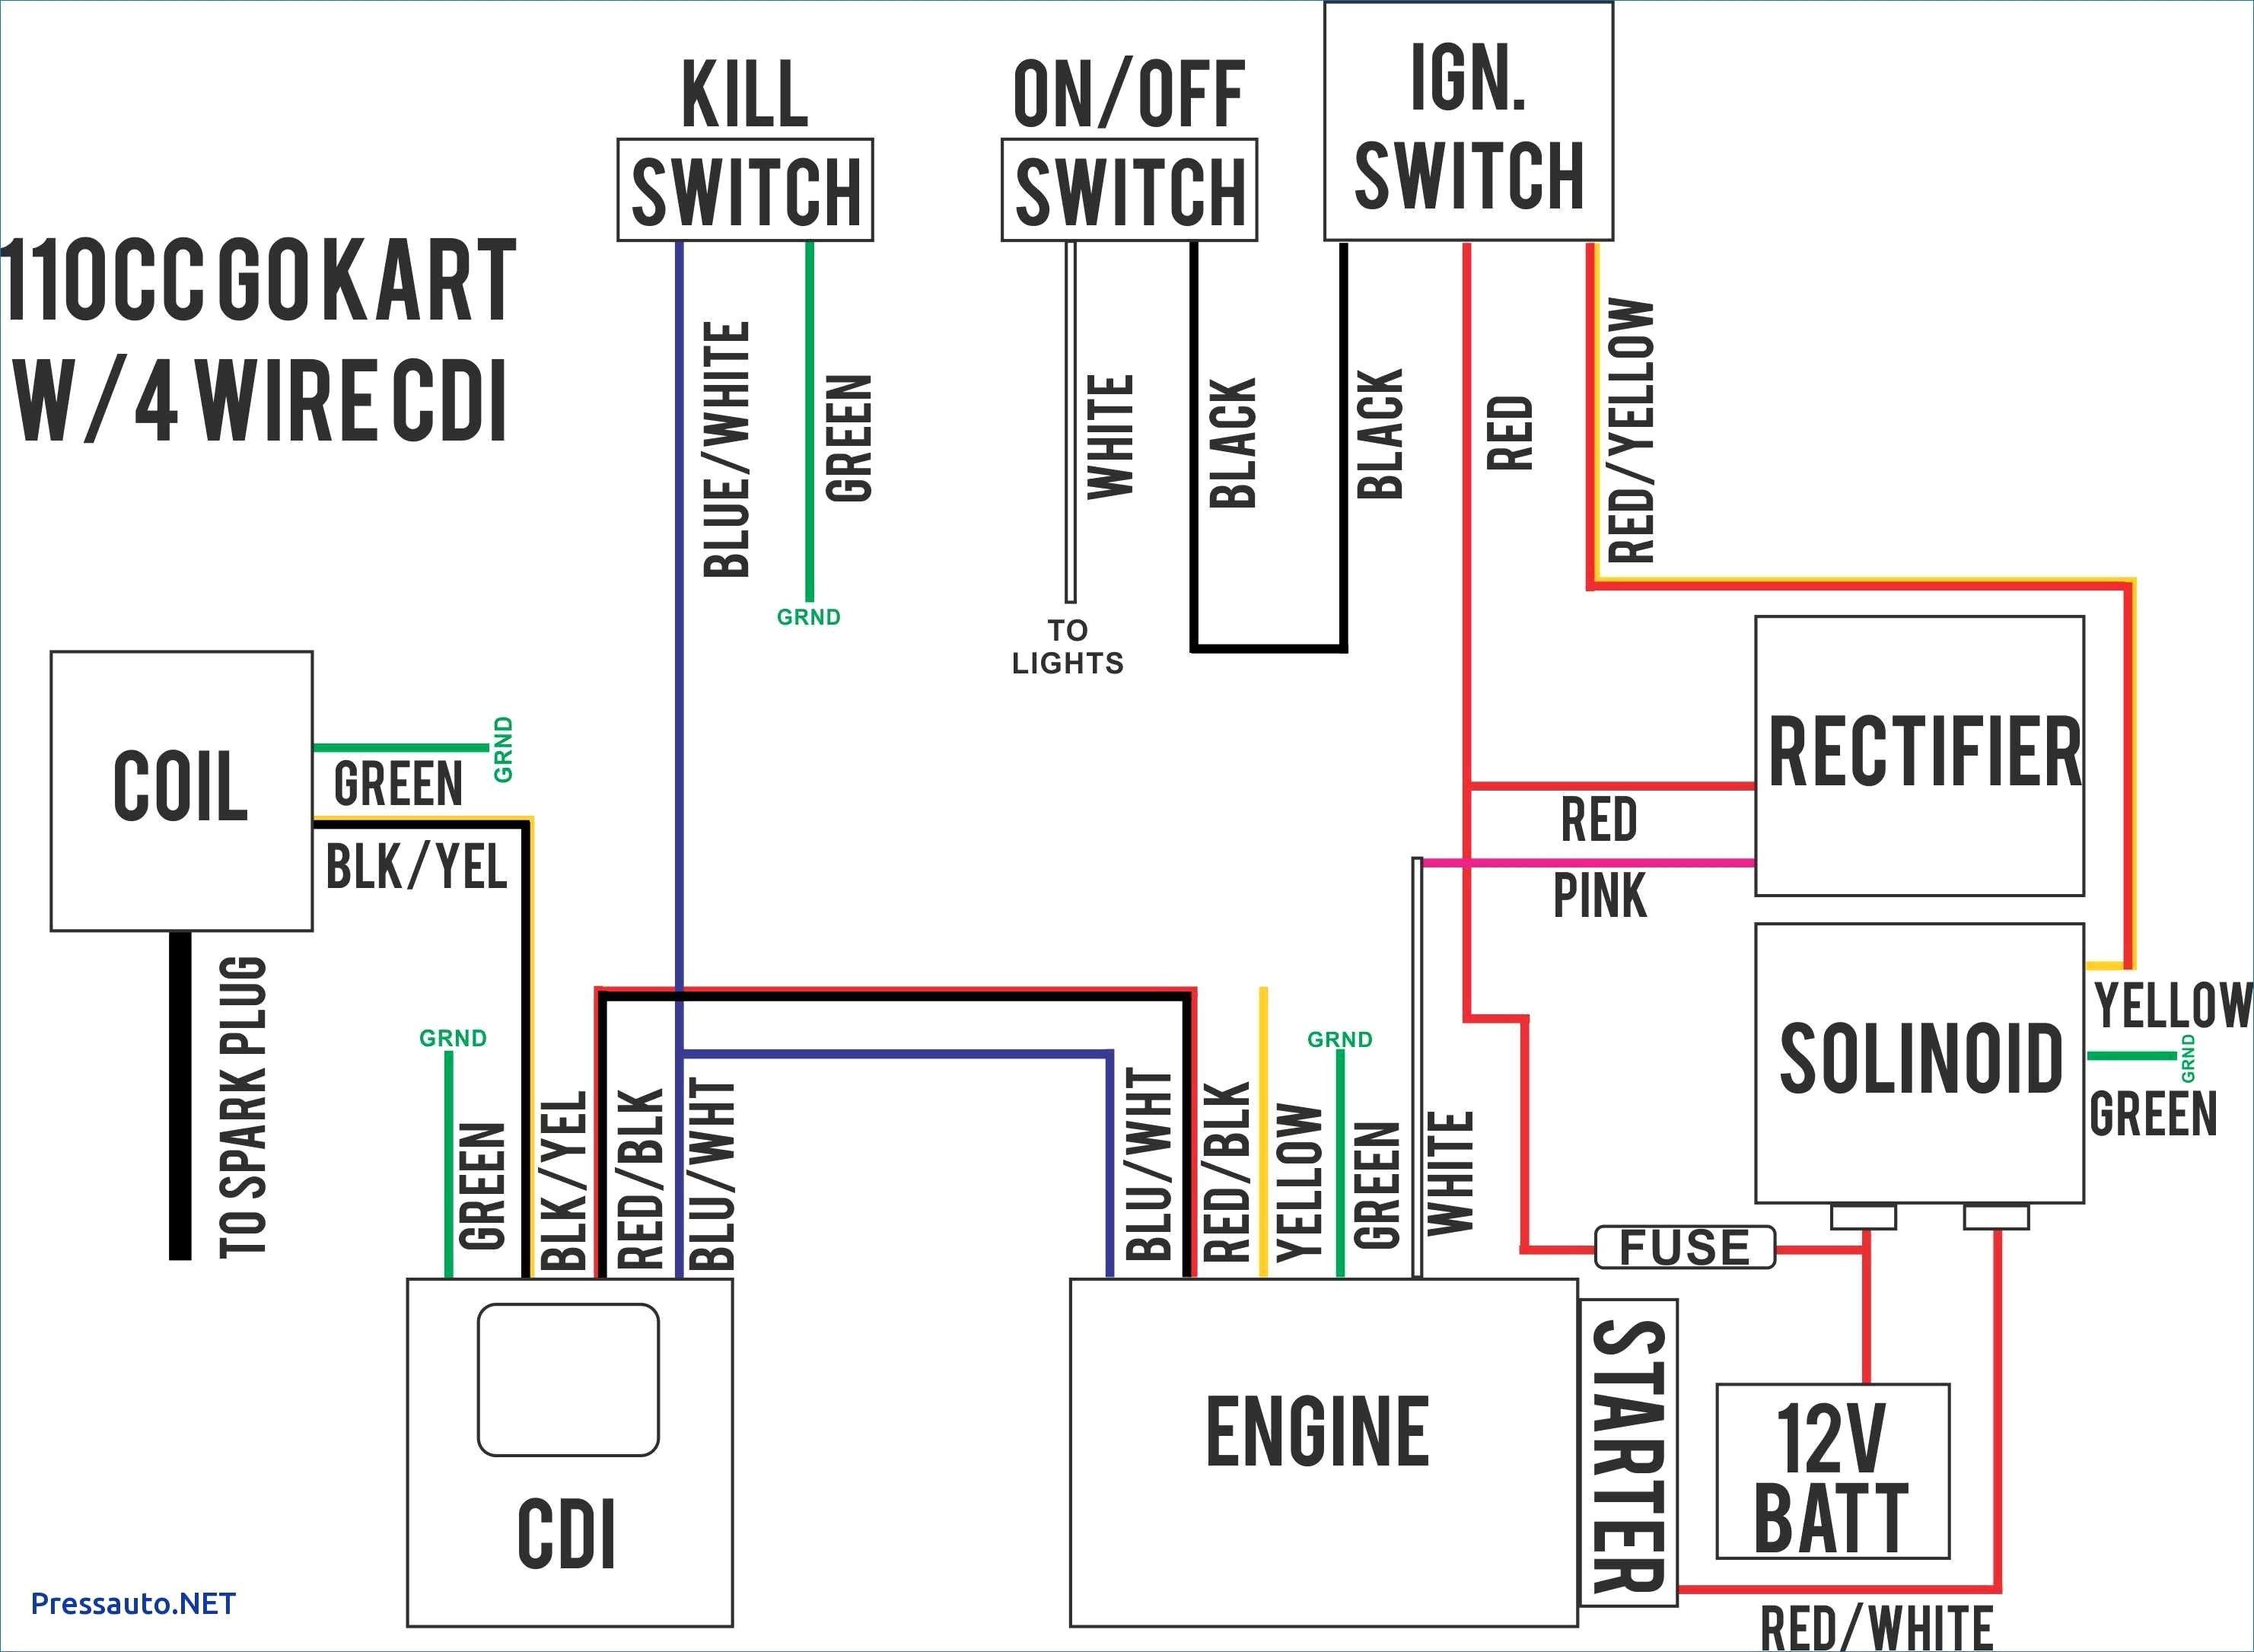 Dc 150 Wiring Diagram Get Free Image About Wiring Diagram WIRE